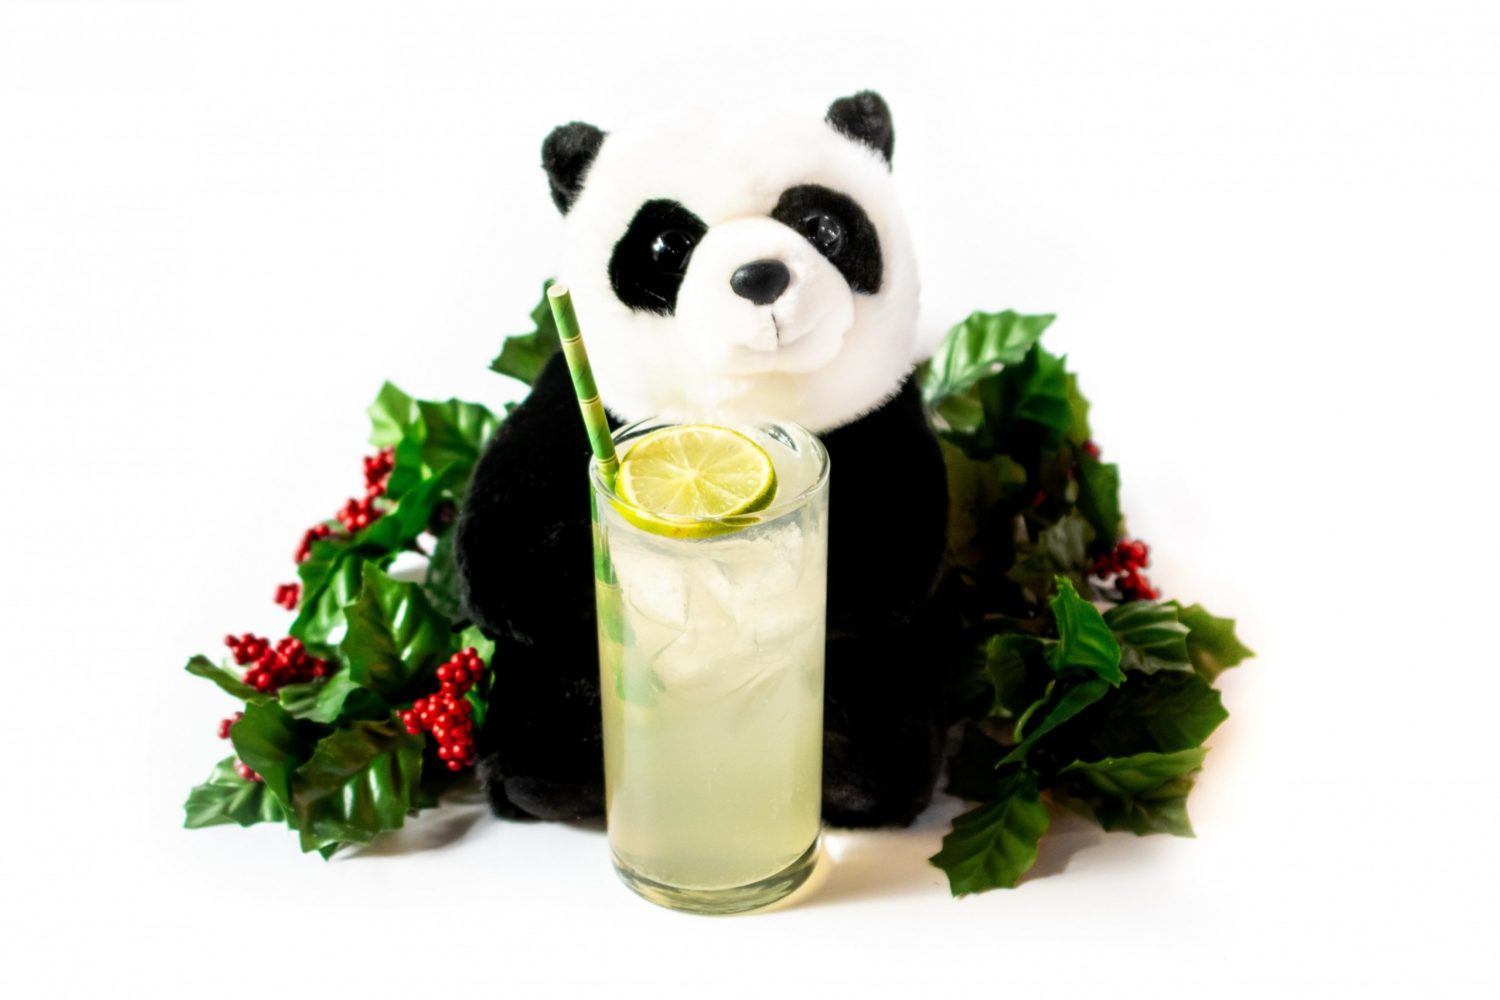 The Santa Bei Bei cocktail. Photograph by Ana Valentin.